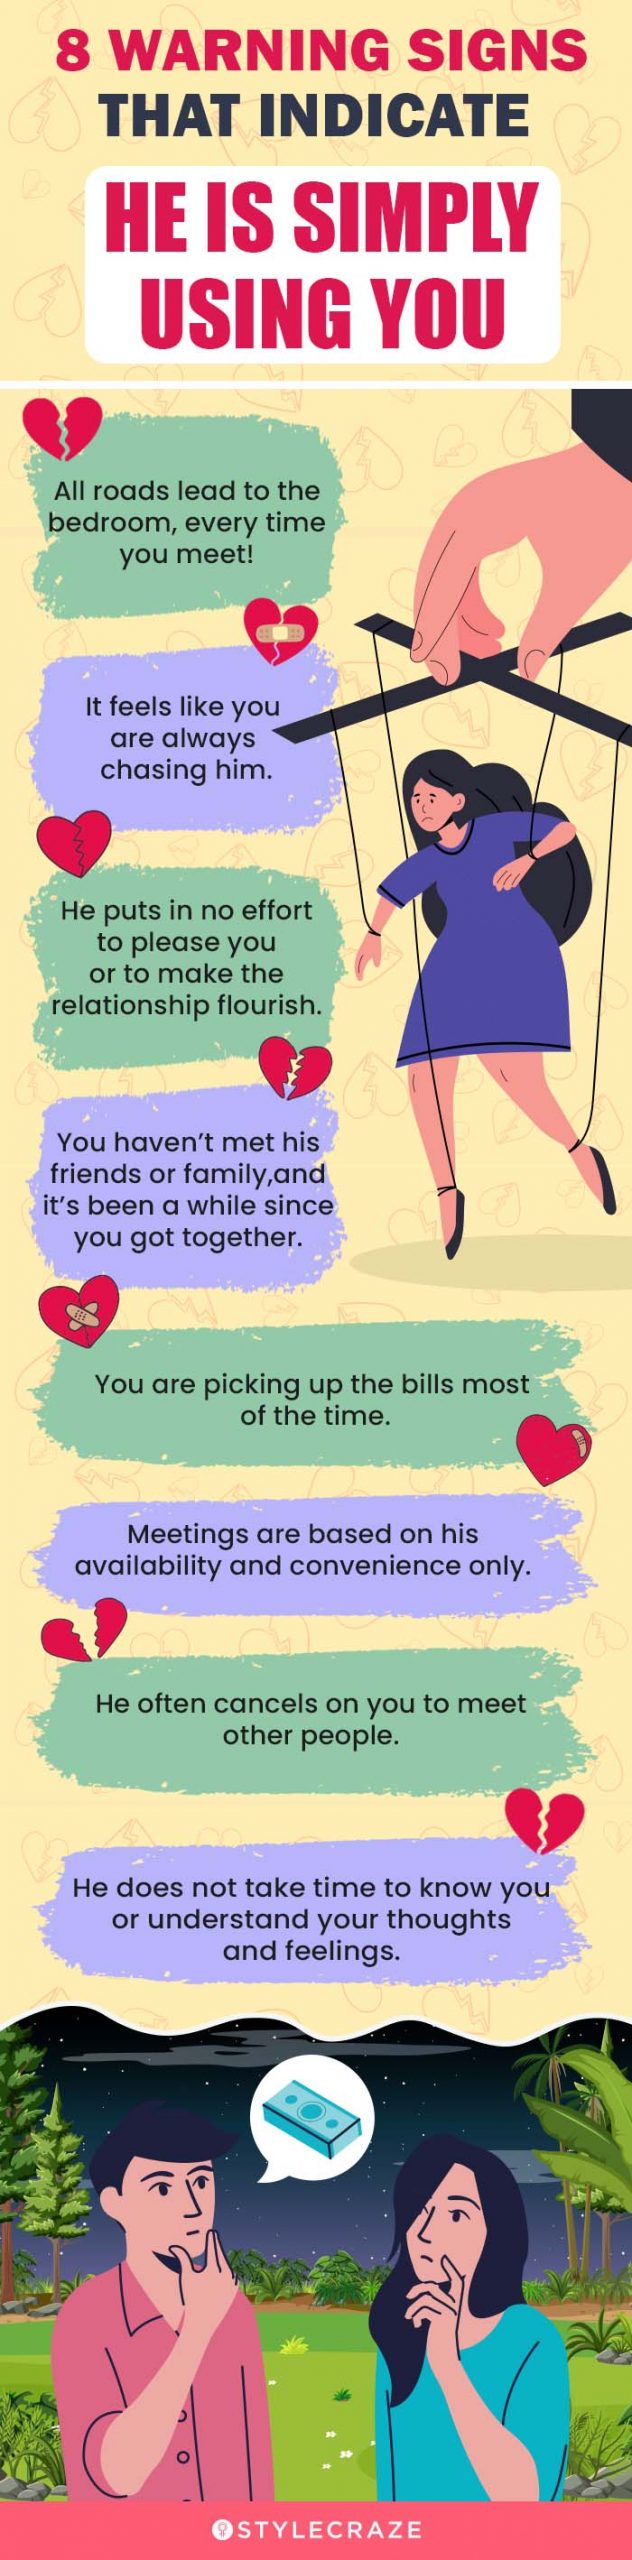 8 warning signs that indicate he is simply using you (infographic)